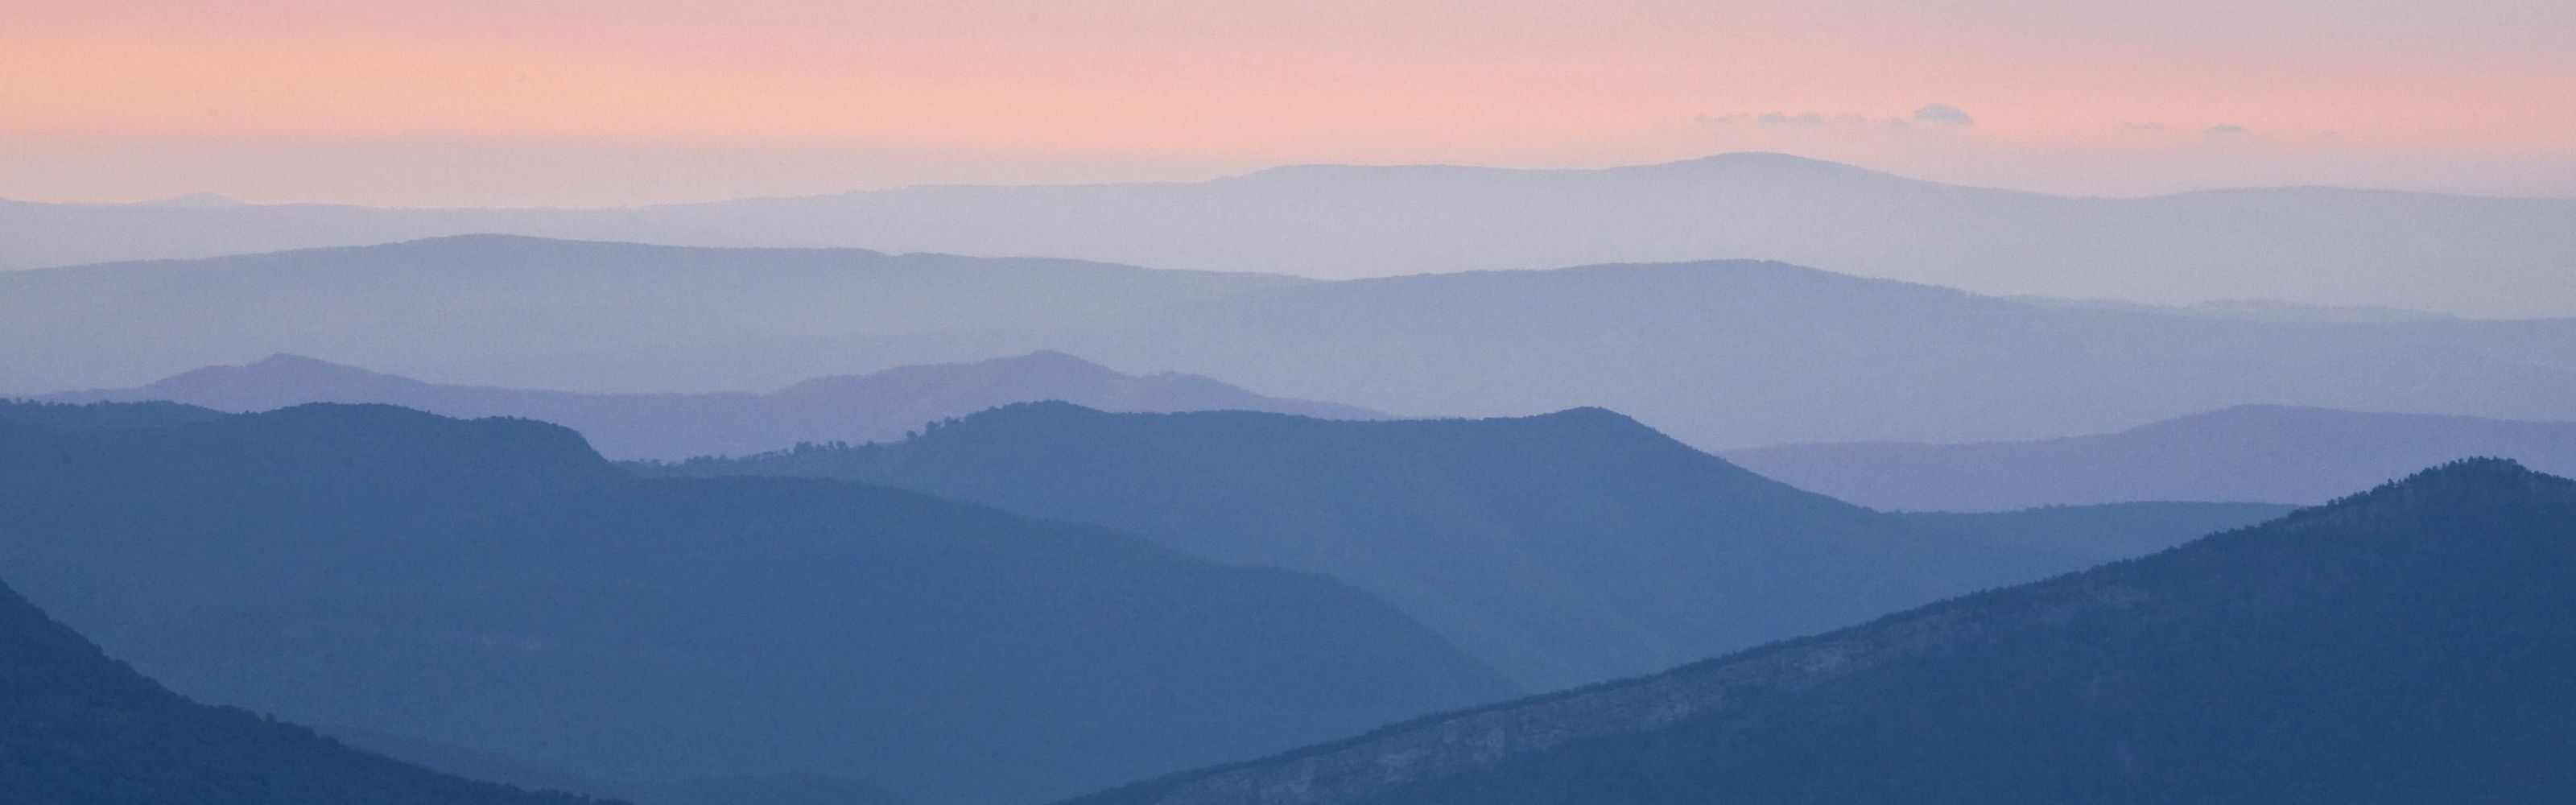 Dawn high above Canaan Valley, in the Dolly Sods Wilderness, West Virginia.